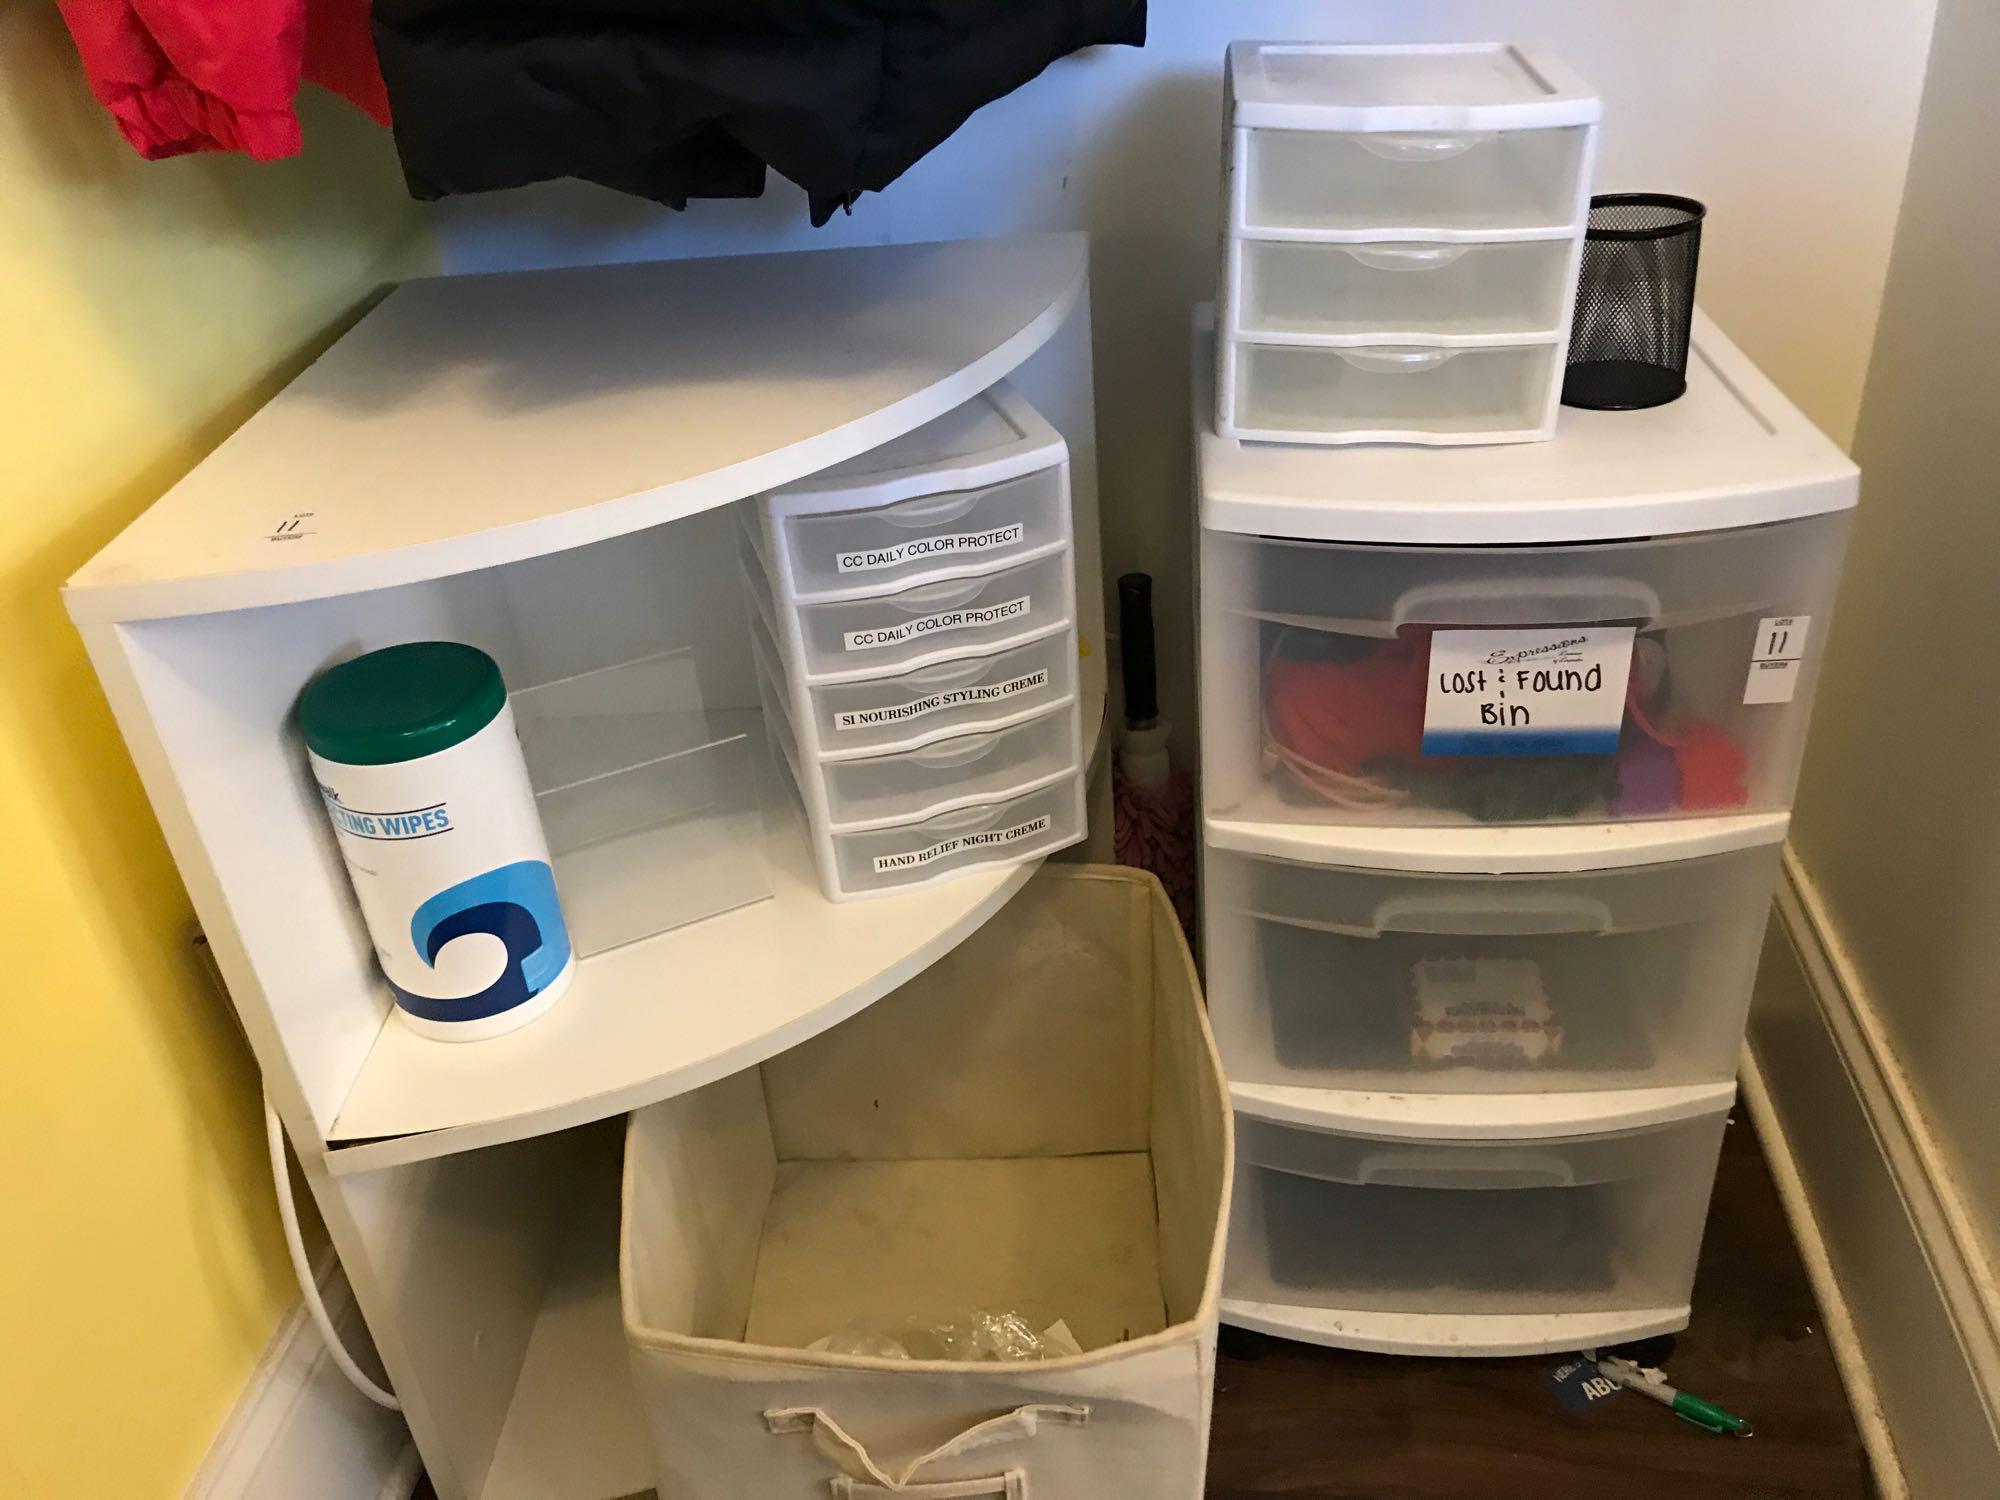 Shelf, Storage Drawers, and Contents